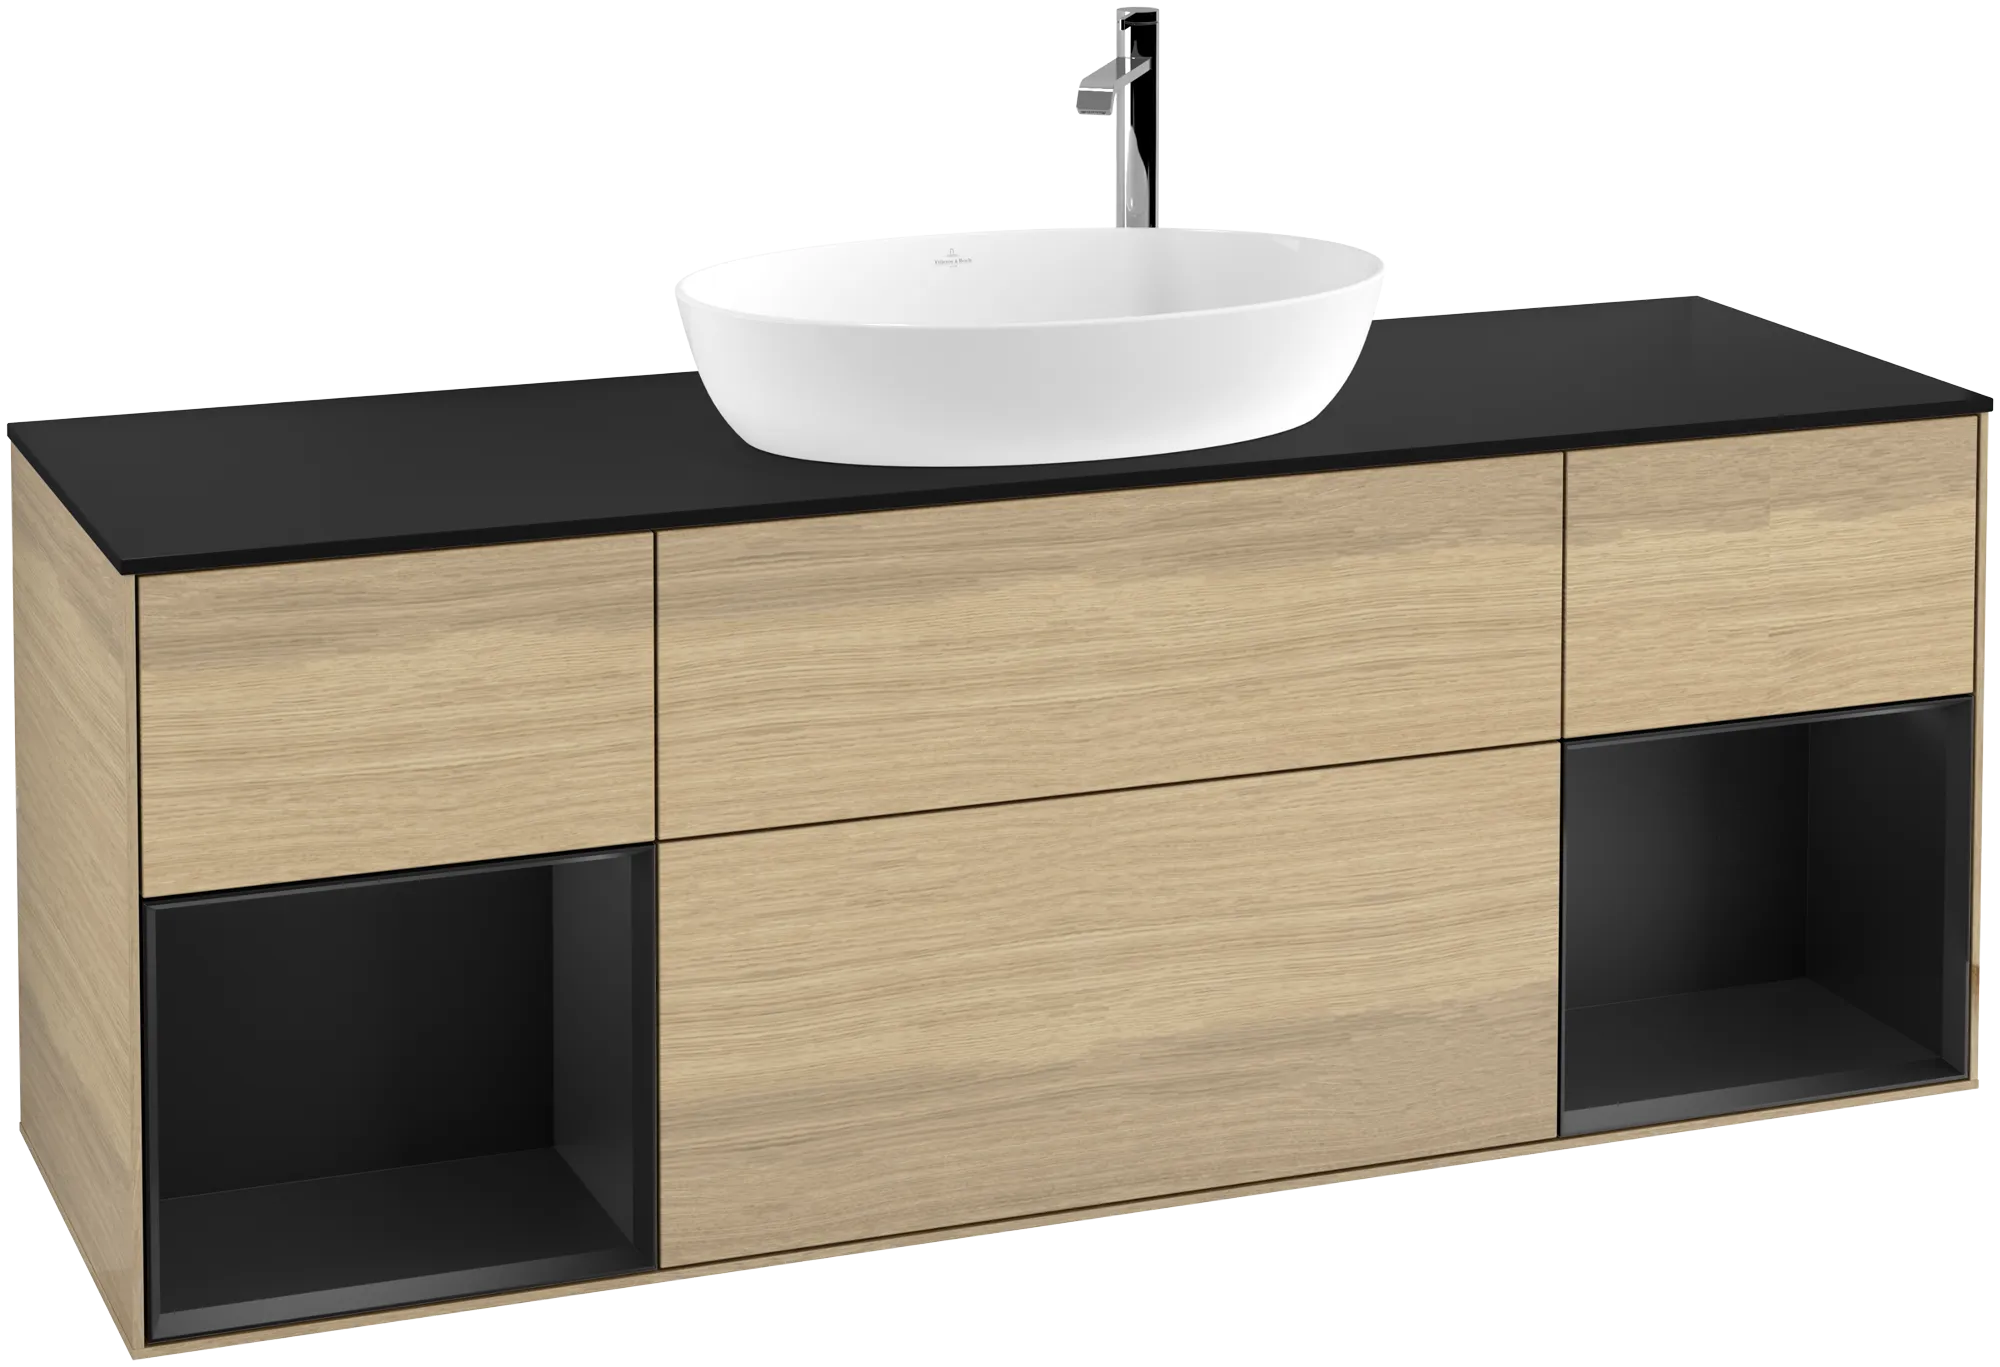 Picture of VILLEROY BOCH Finion Vanity unit, with lighting, 4 pull-out compartments, 1600 x 603 x 501 mm, Oak Veneer / Black Matt Lacquer / Glass Black Matt #G982PDPC